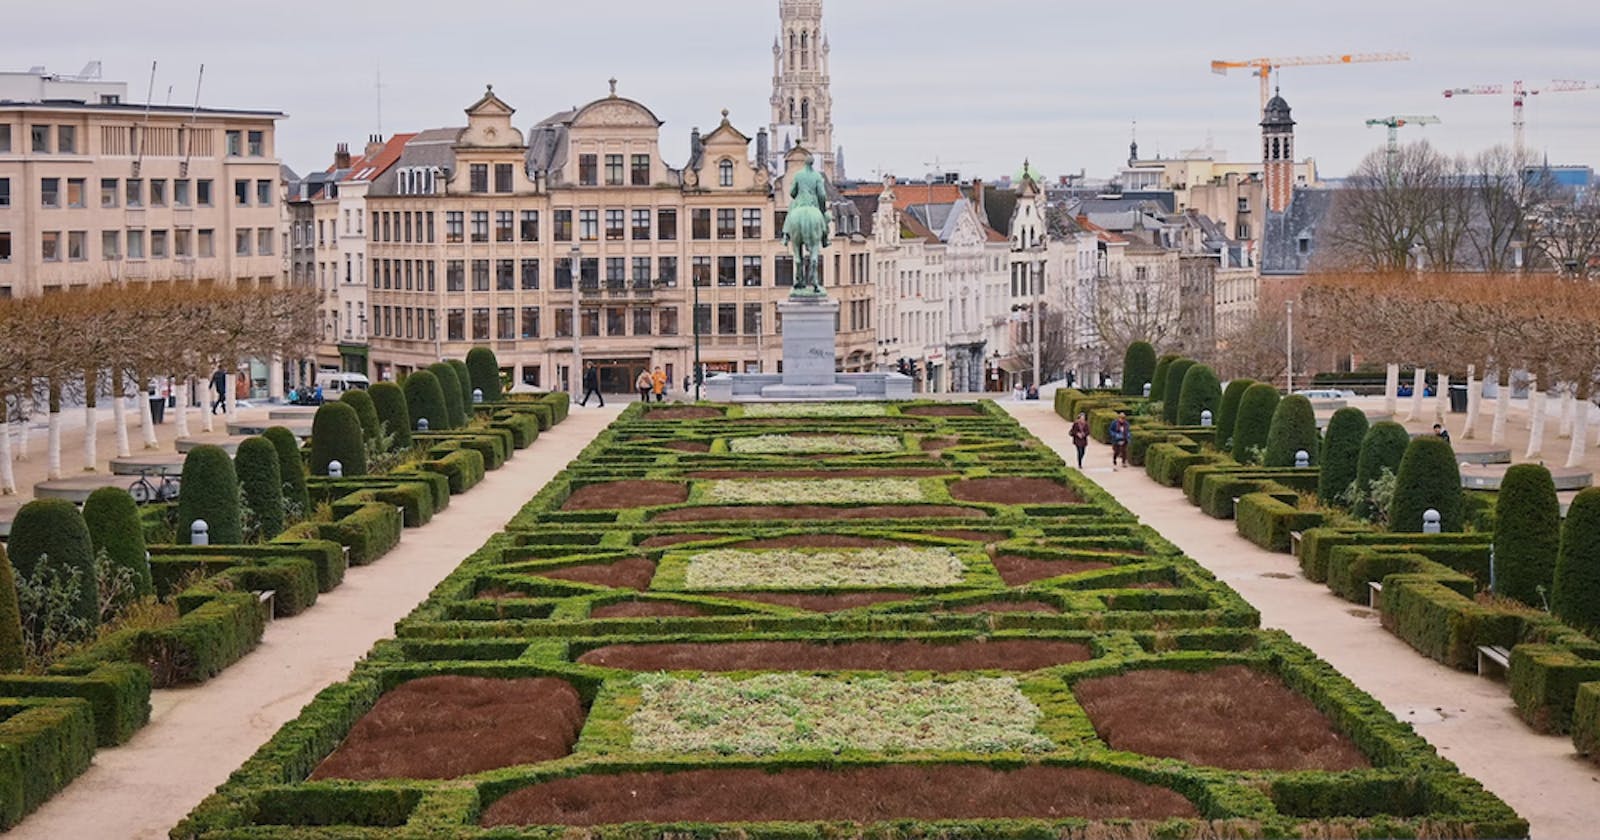 Day Trips from Brussels, Belgium